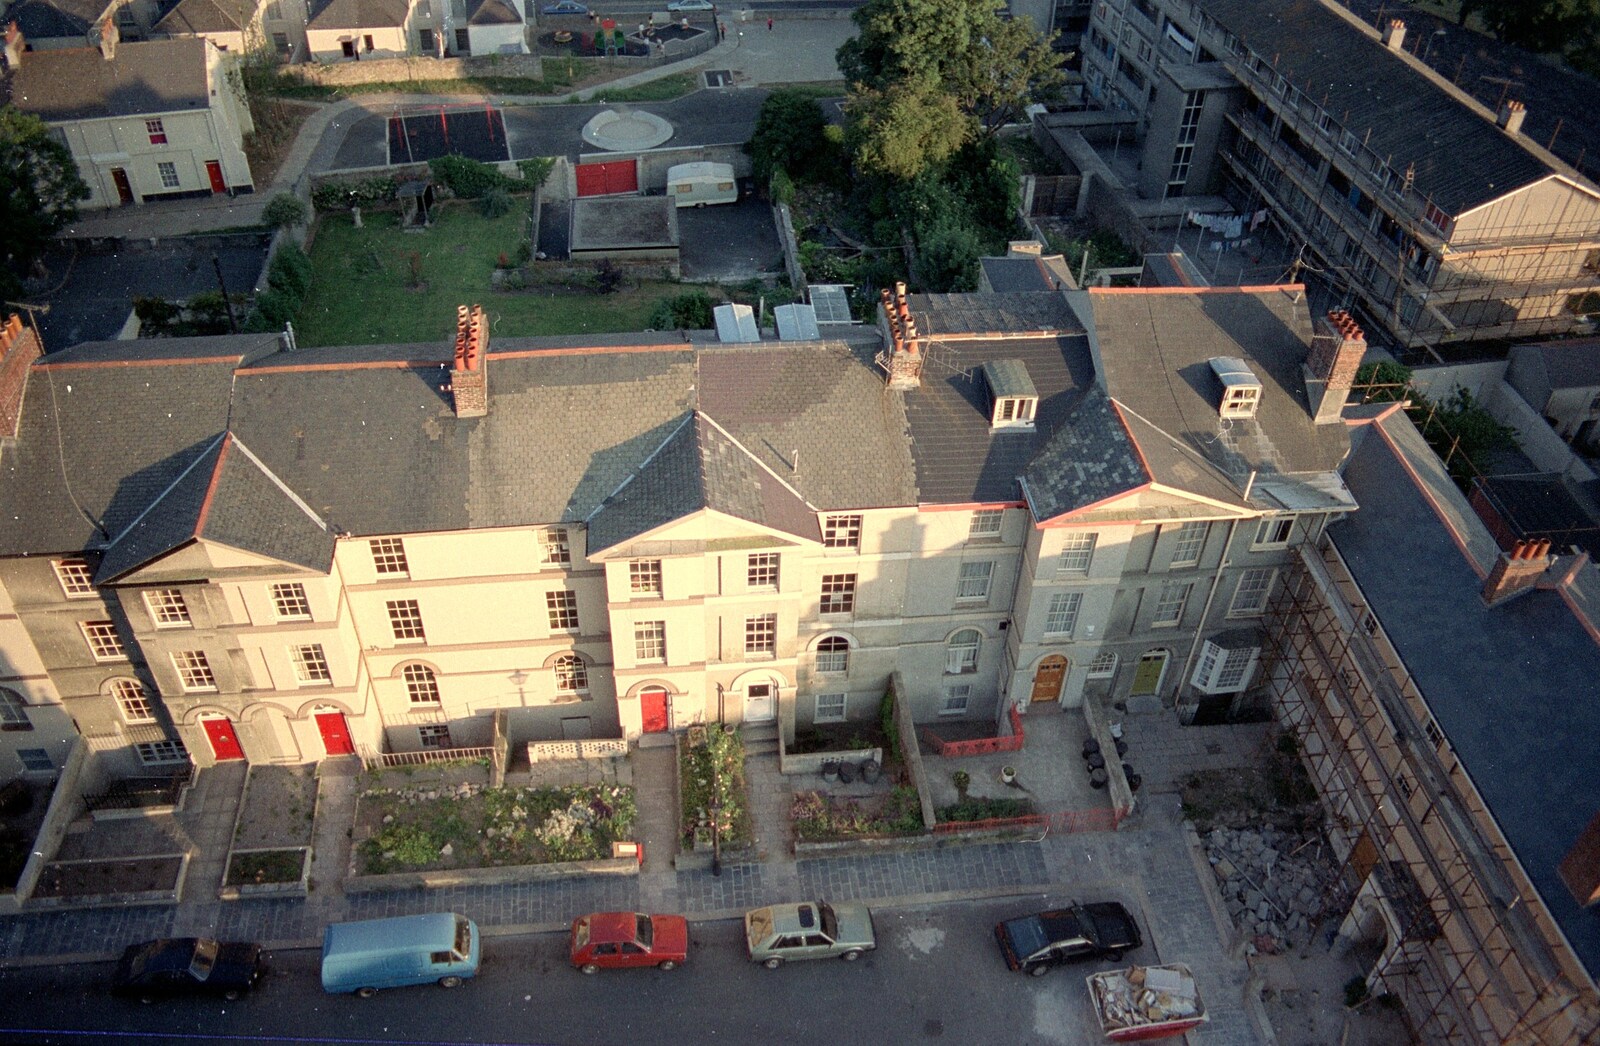 Looking down on the flat from Uni: Views From St. Peter's Church Tower, Wyndham Square, Plymouth, Devon - 15th June 1989